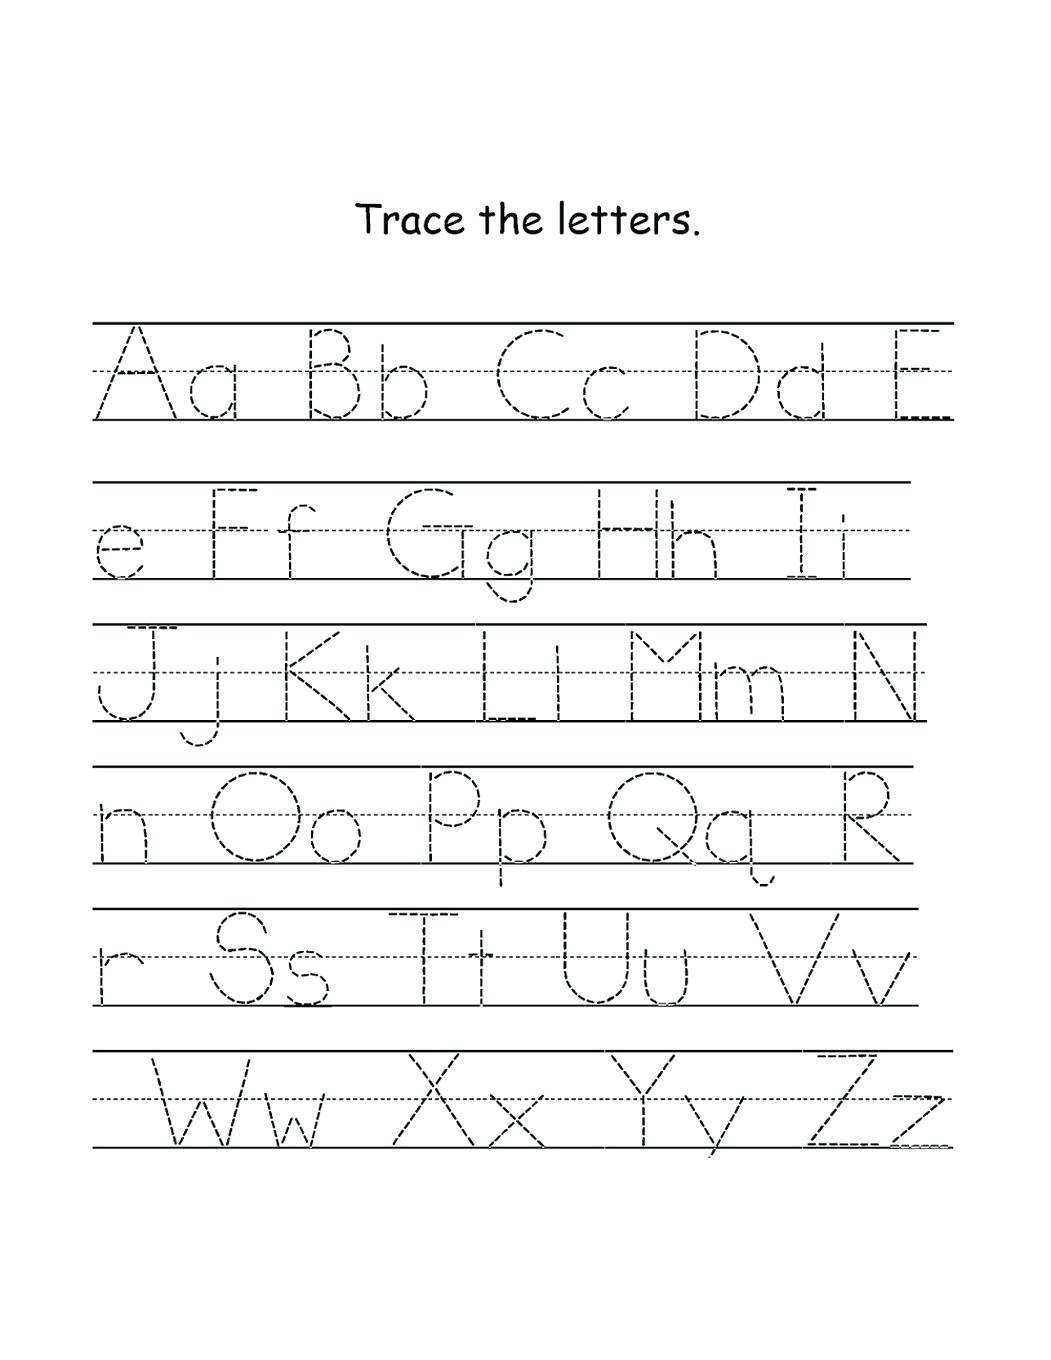 Basic Tracing Worksheets Tracing Letters A Z Worksheets Easy with Tracing Letters Worksheets A-Z